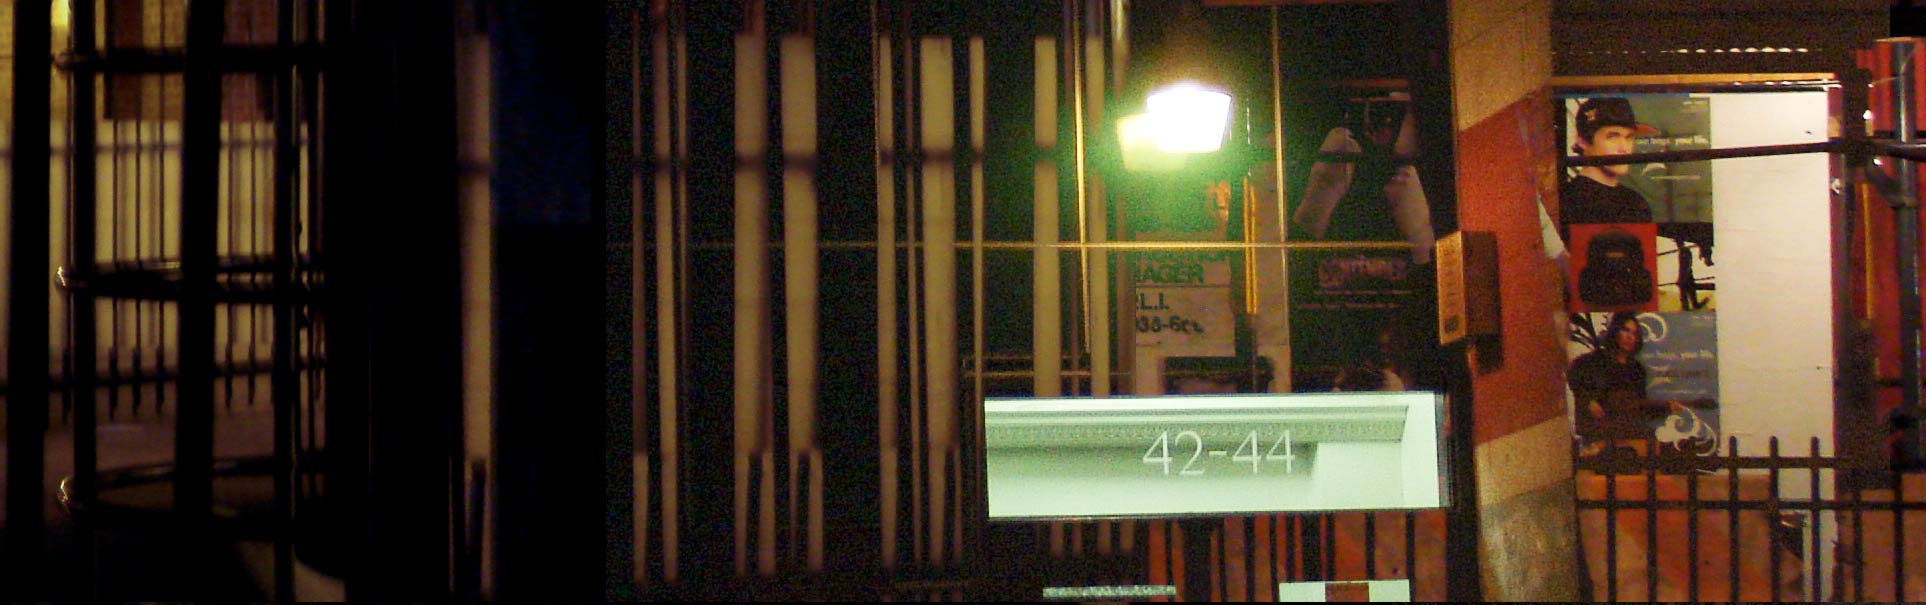 [scene 2 flickering]<br />
			through a zoetrope of slender bars <br />
			the interior <span class="enlarge">animates</span> <br />
			frames of a film unfurling on the street.